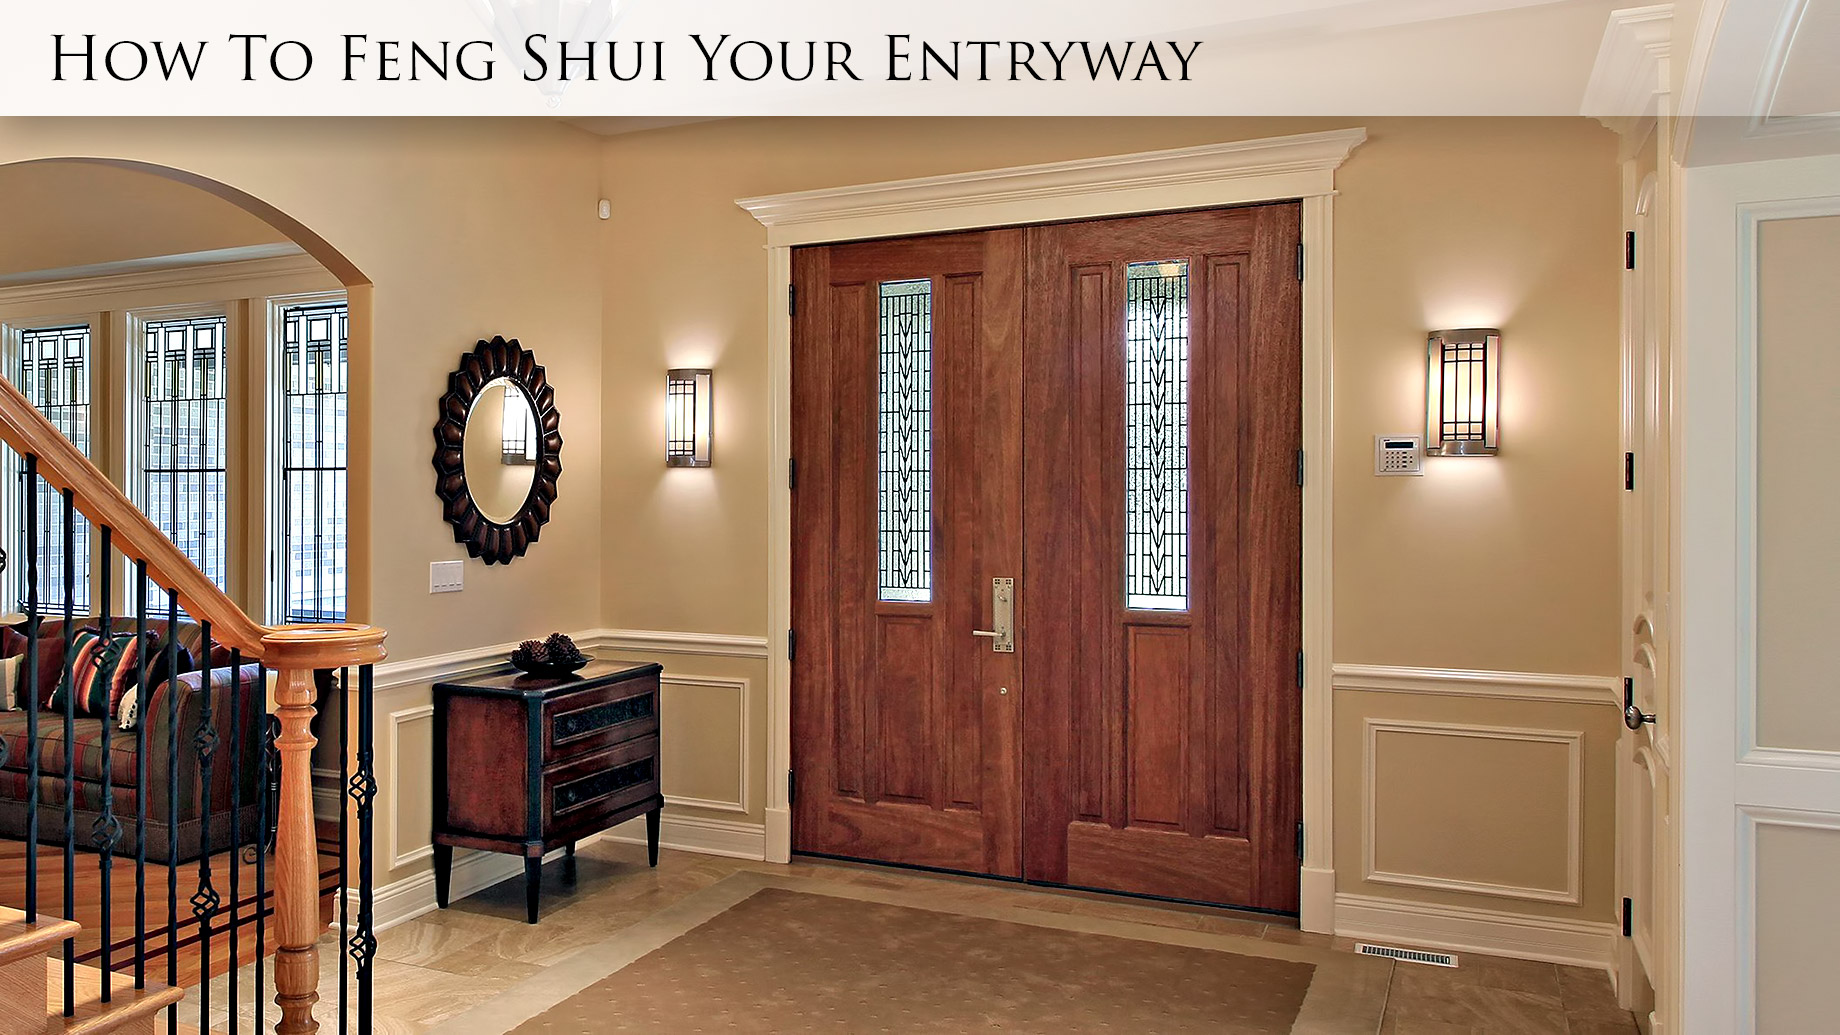 How To Feng Shui Your Entryway – The Pinnacle List